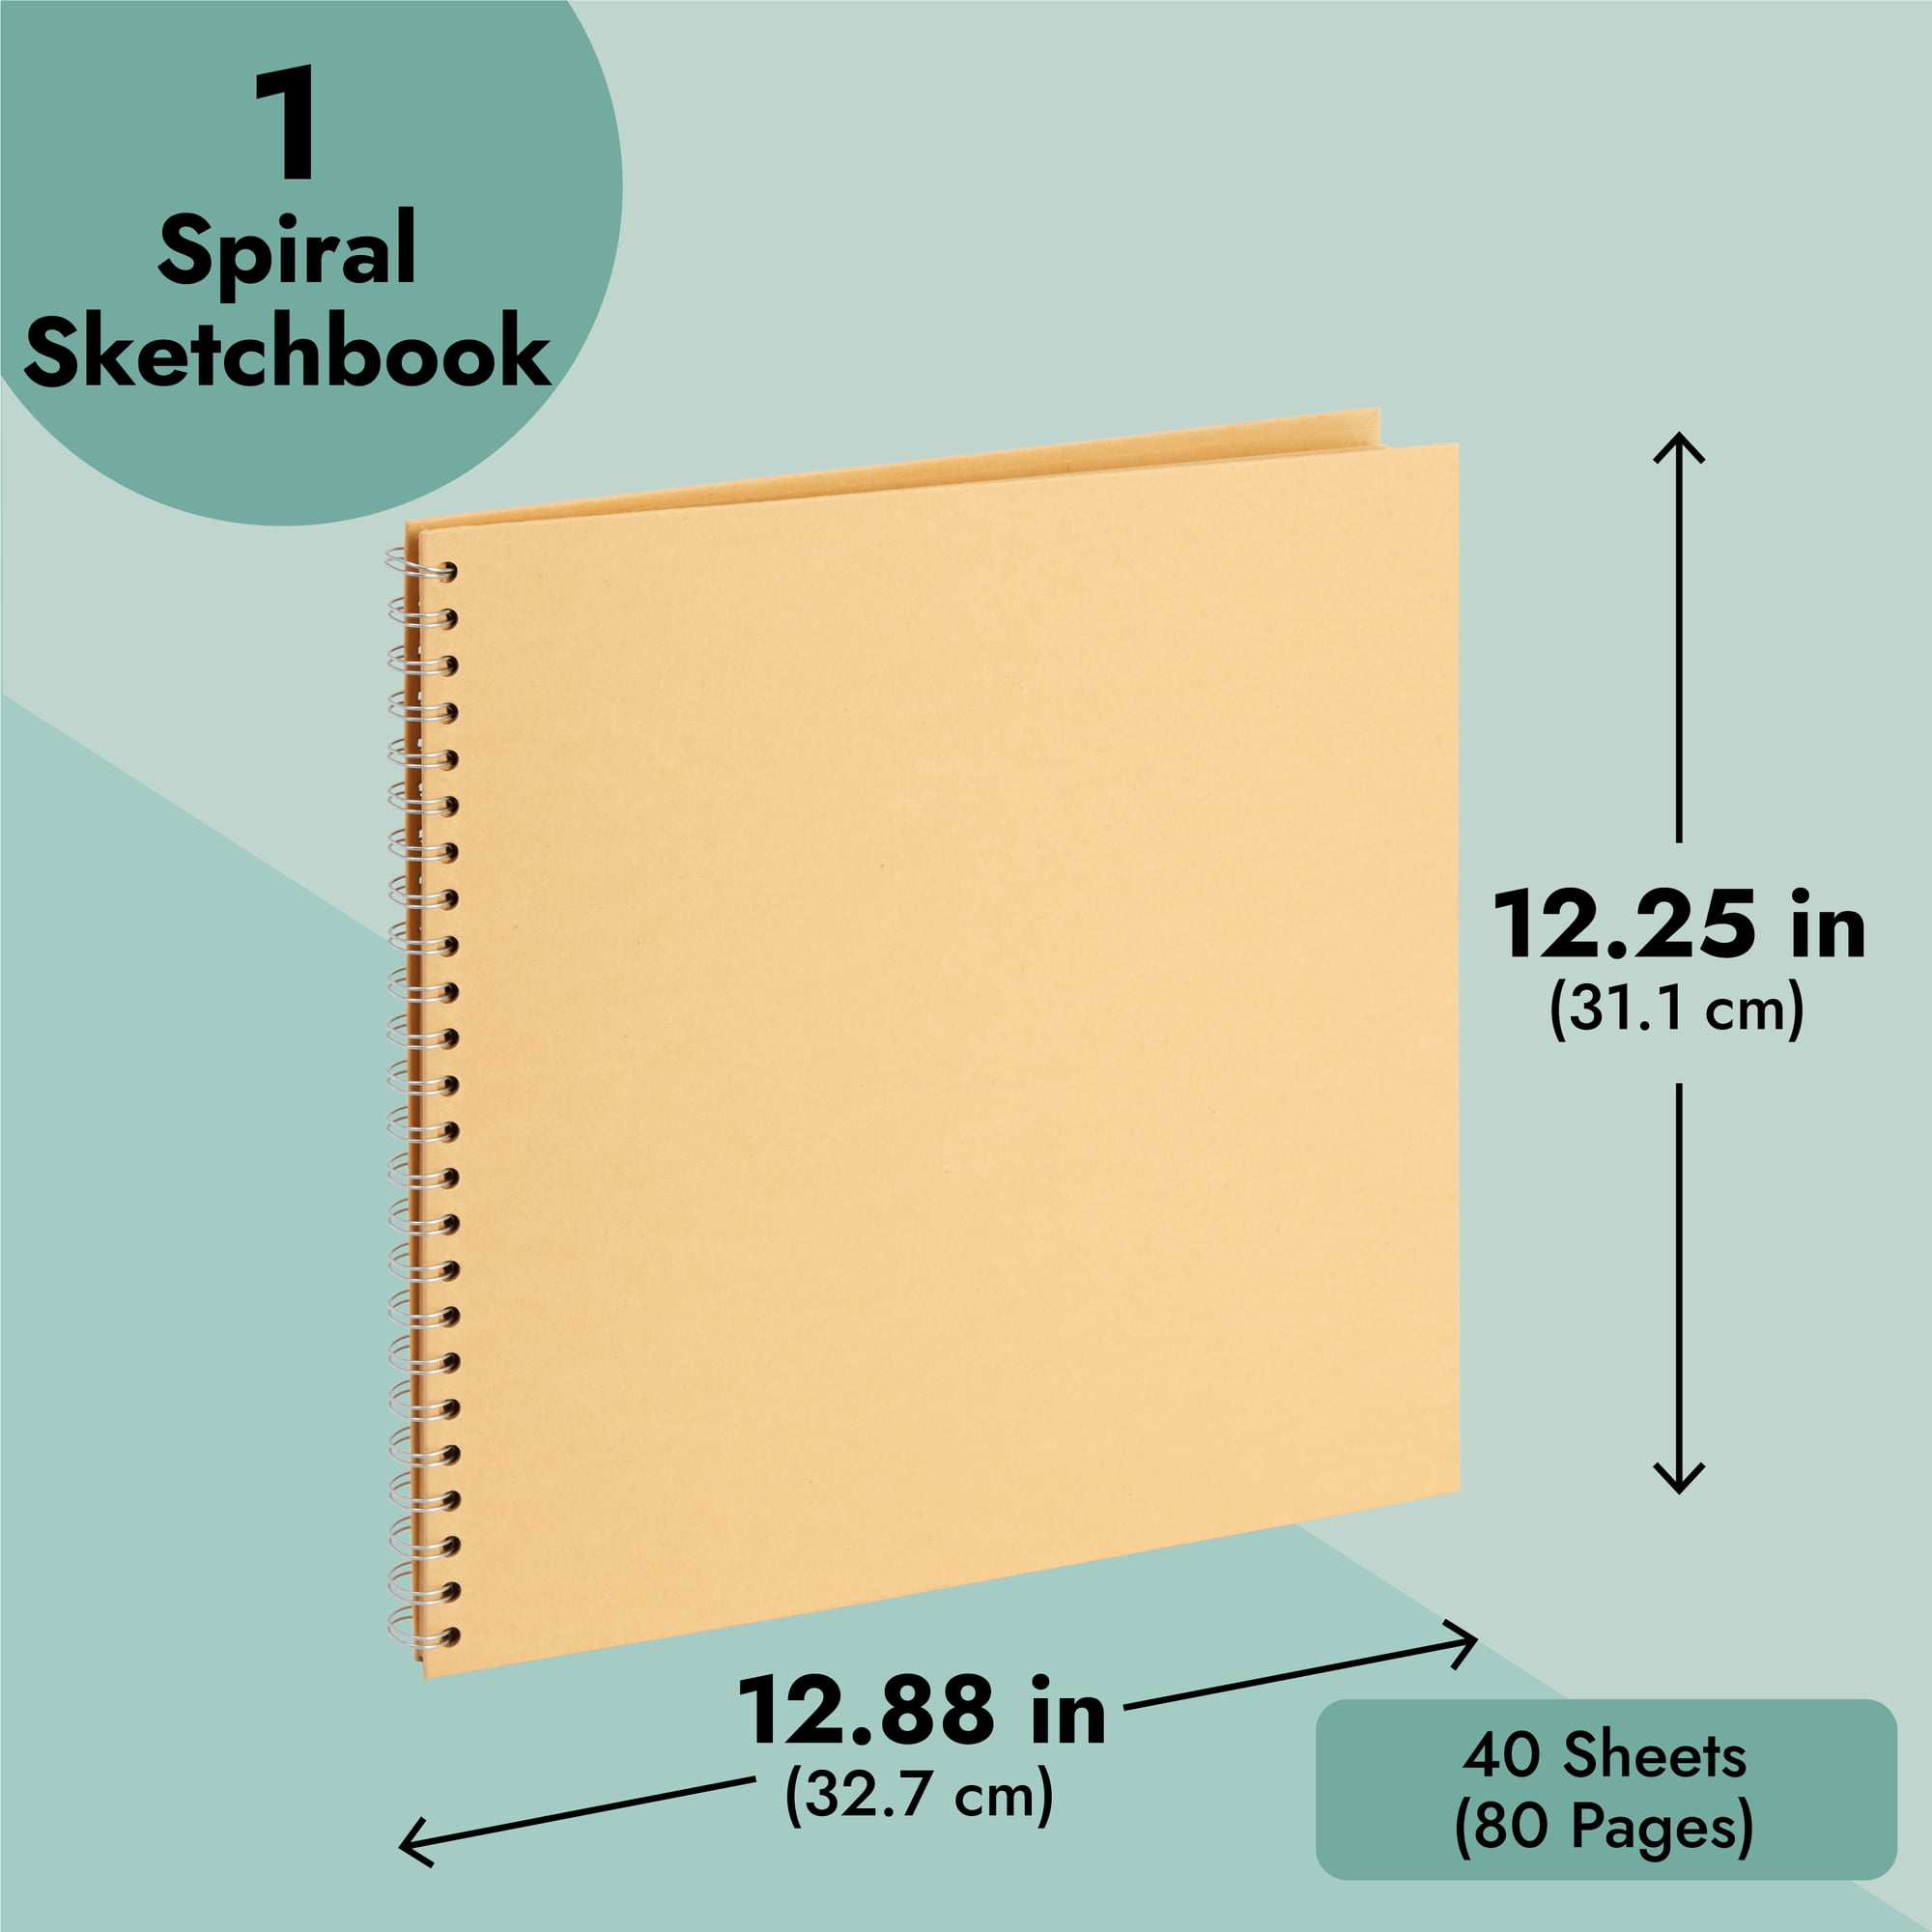 Travel Scrapbook Album, 12 x 12, 10 Top Load Pages, Unbranded, New